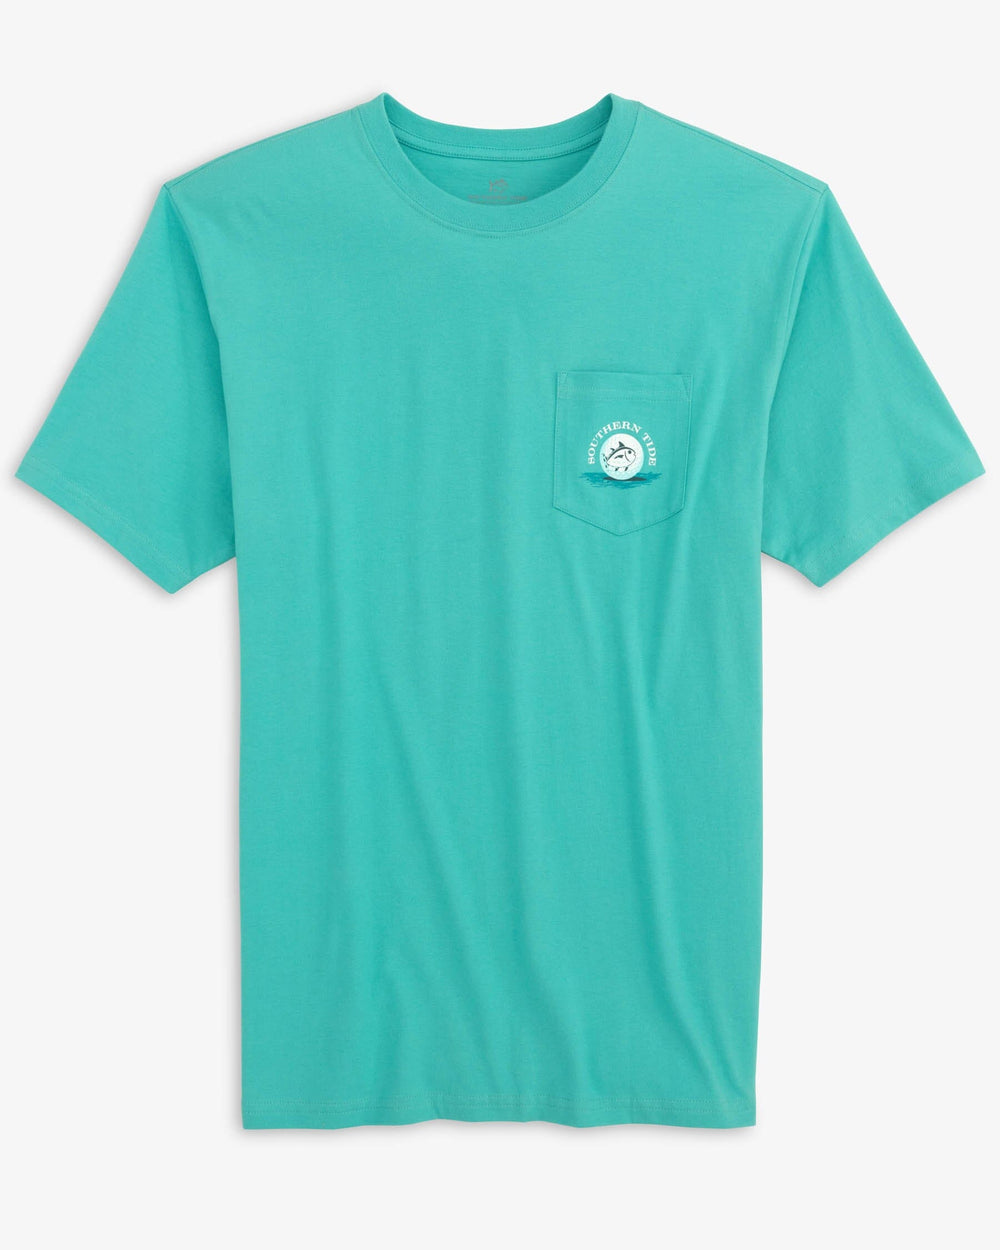 The front view of the Southern Tide Lucky Jacks 19th Hole T-Shirt by Southern Tide - Tidal Wave